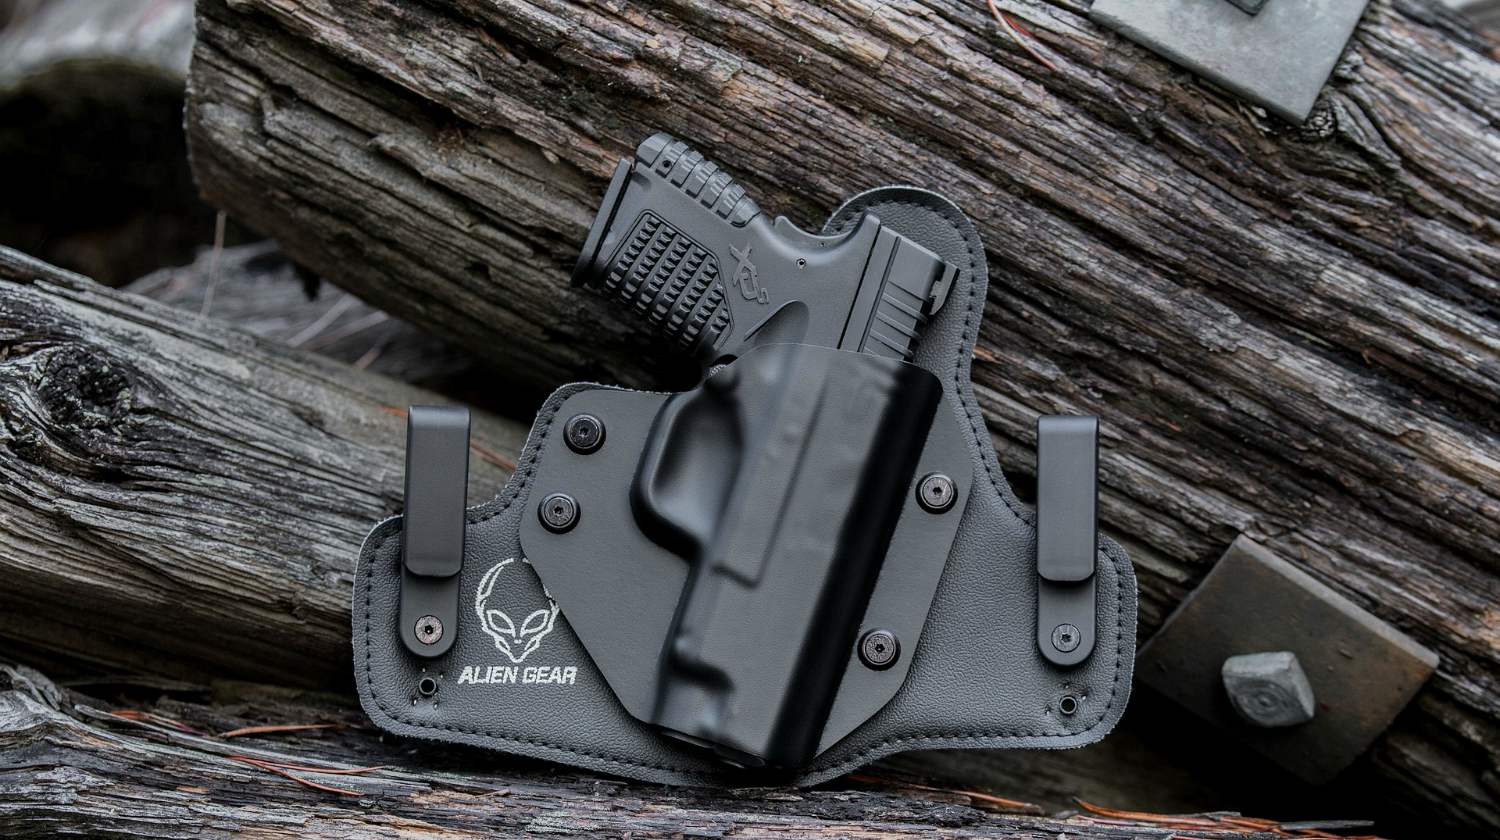 Feature | Black handgun in the woods | Self-Defense Weapons: Guns You Need For When SHTF